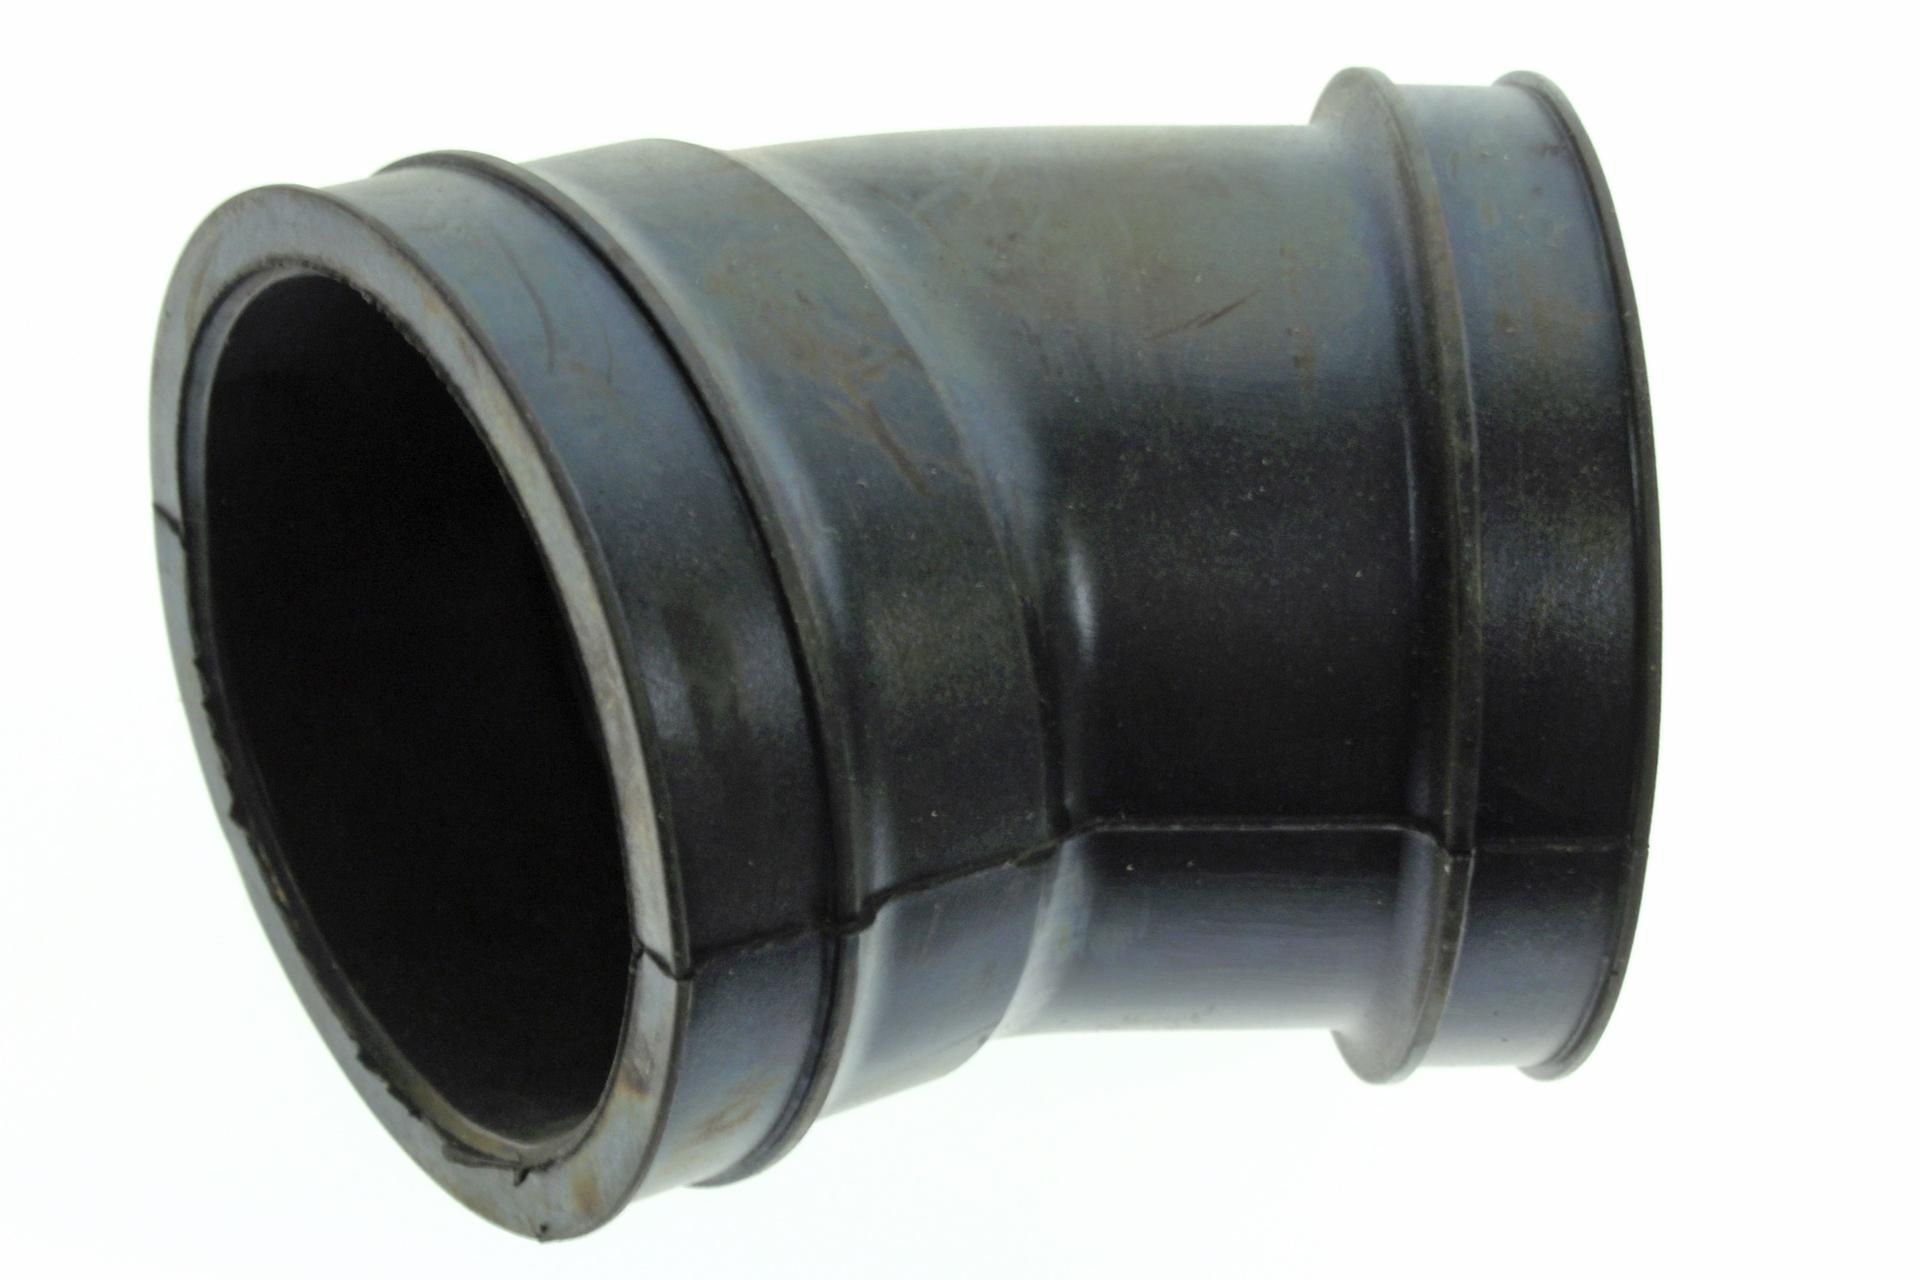 5UH-E5474-00-00 AIR DUCT SEAL